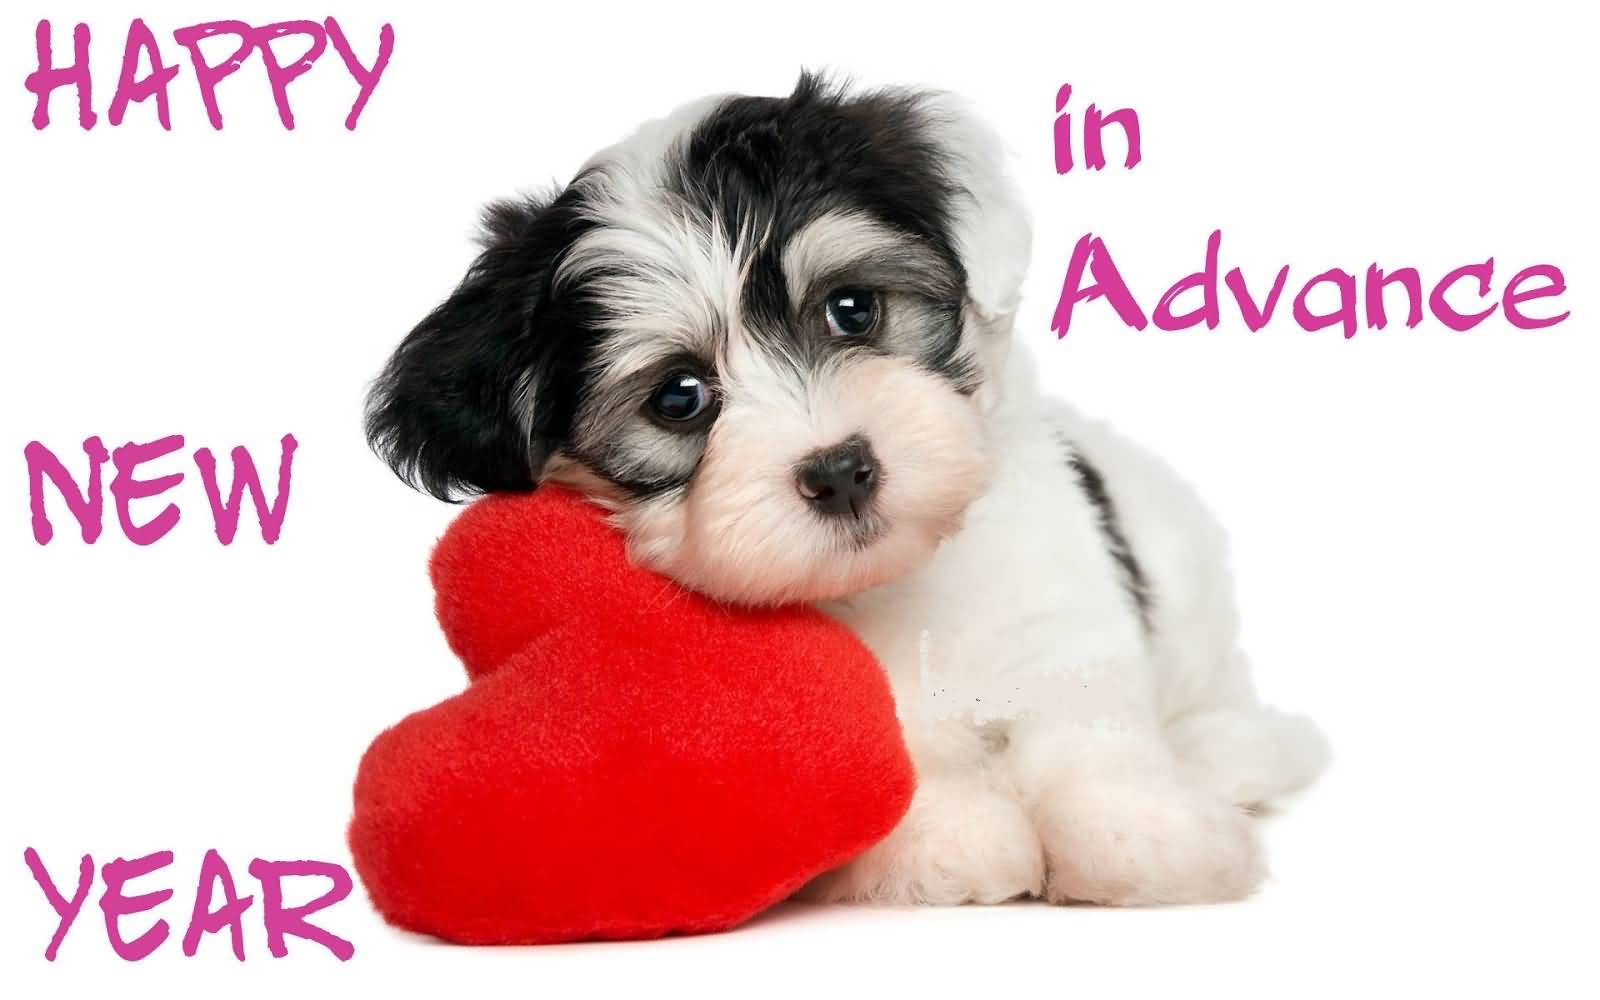 Cute Puppy Dog With Love Heart Wishing You Happy New Year 2016